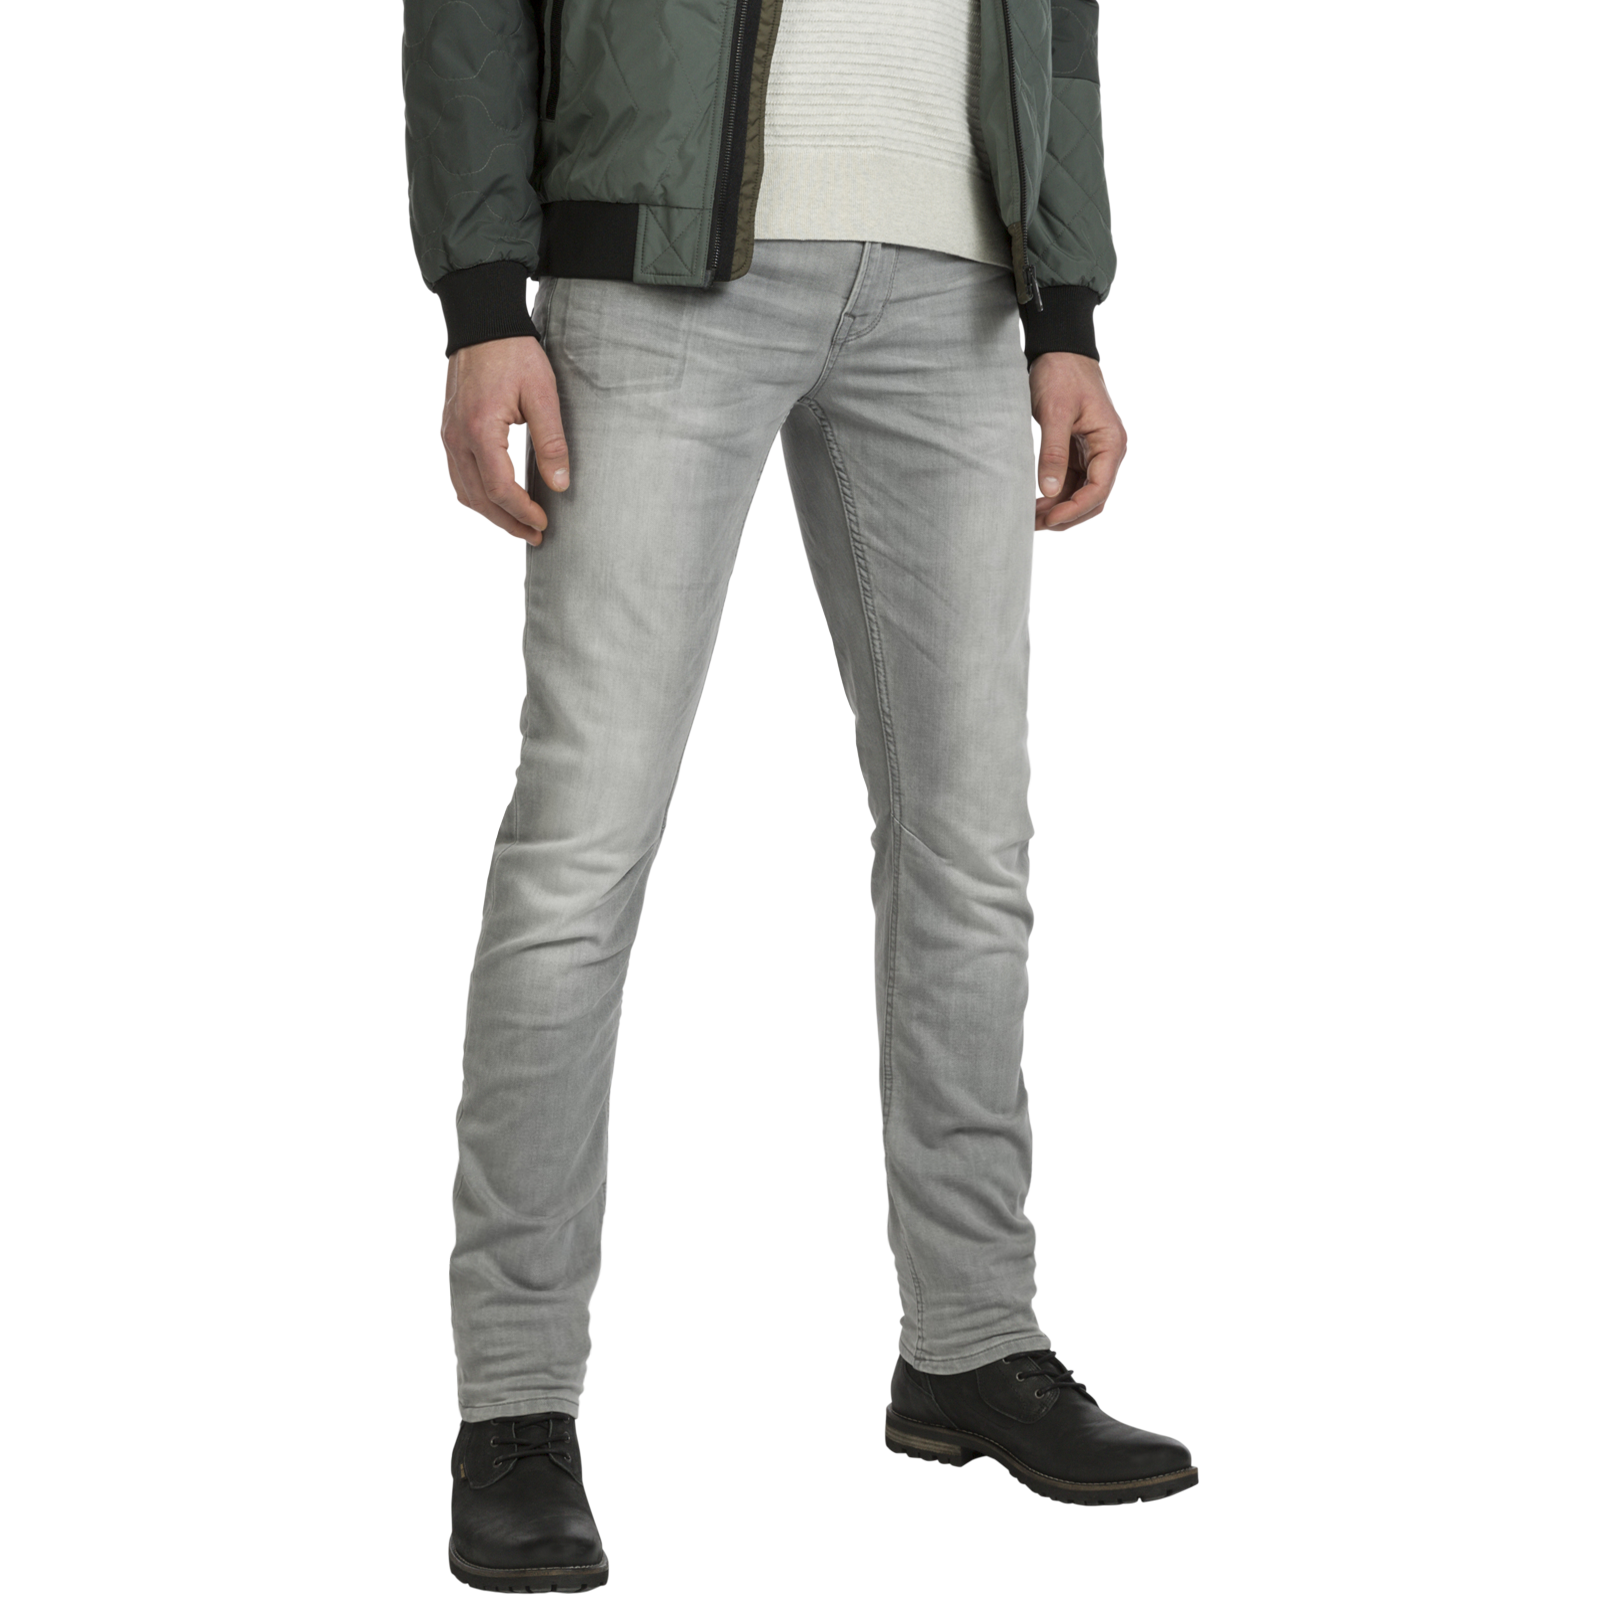 pme legend skymaster tapered fit jeans